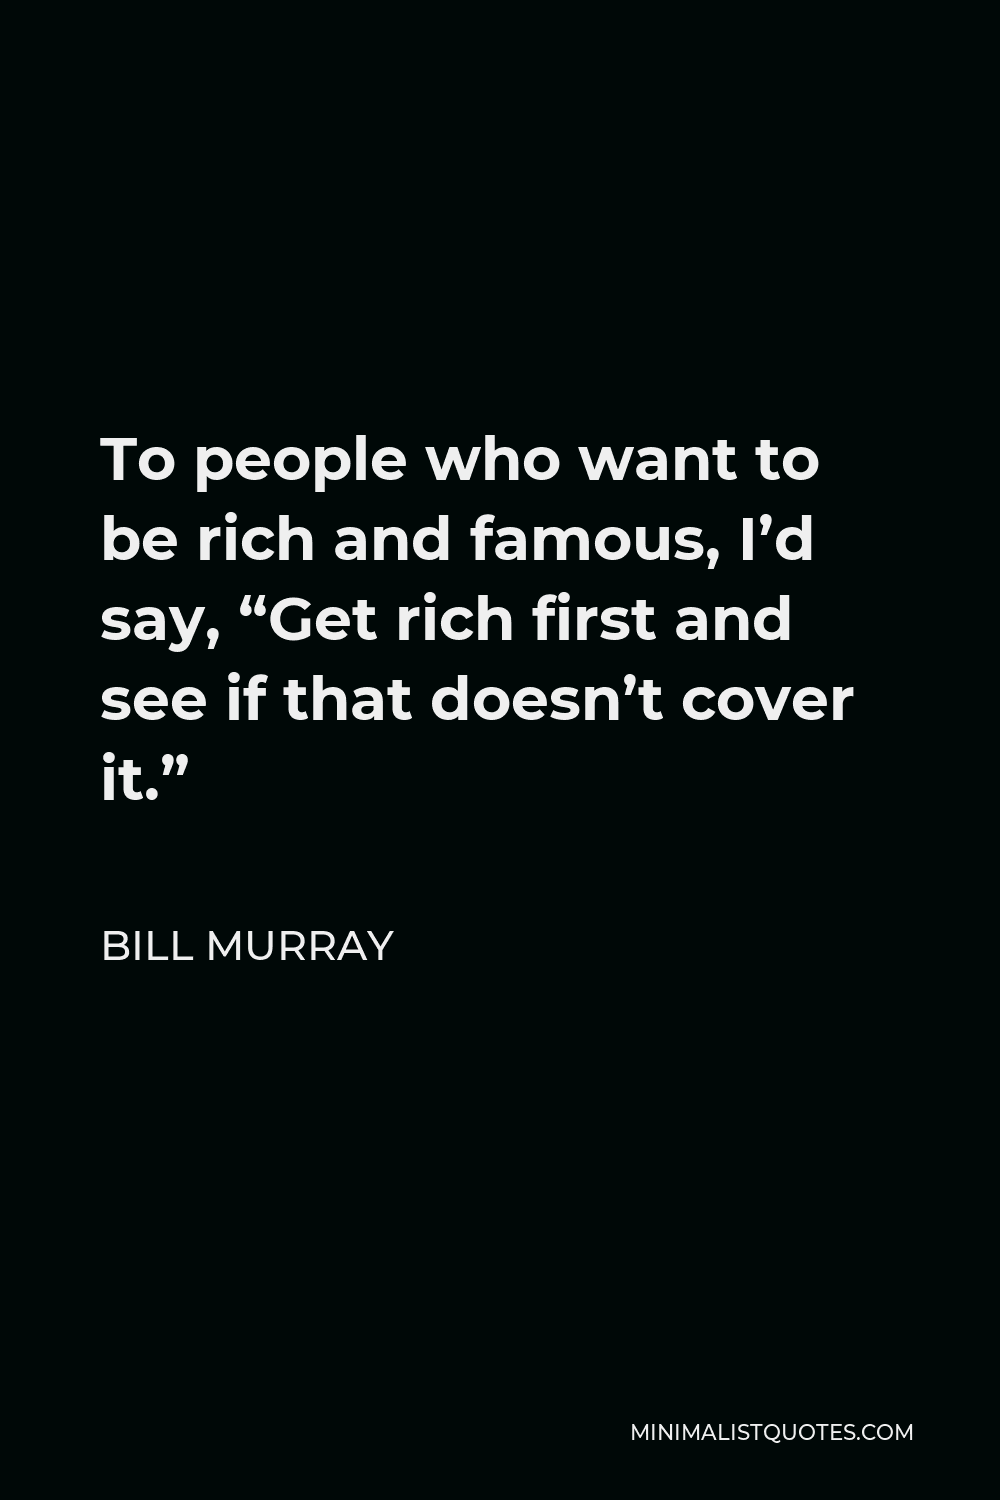 Bill Murray Quote - To people who want to be rich and famous, I’d say, “Get rich first and see if that doesn’t cover it.”